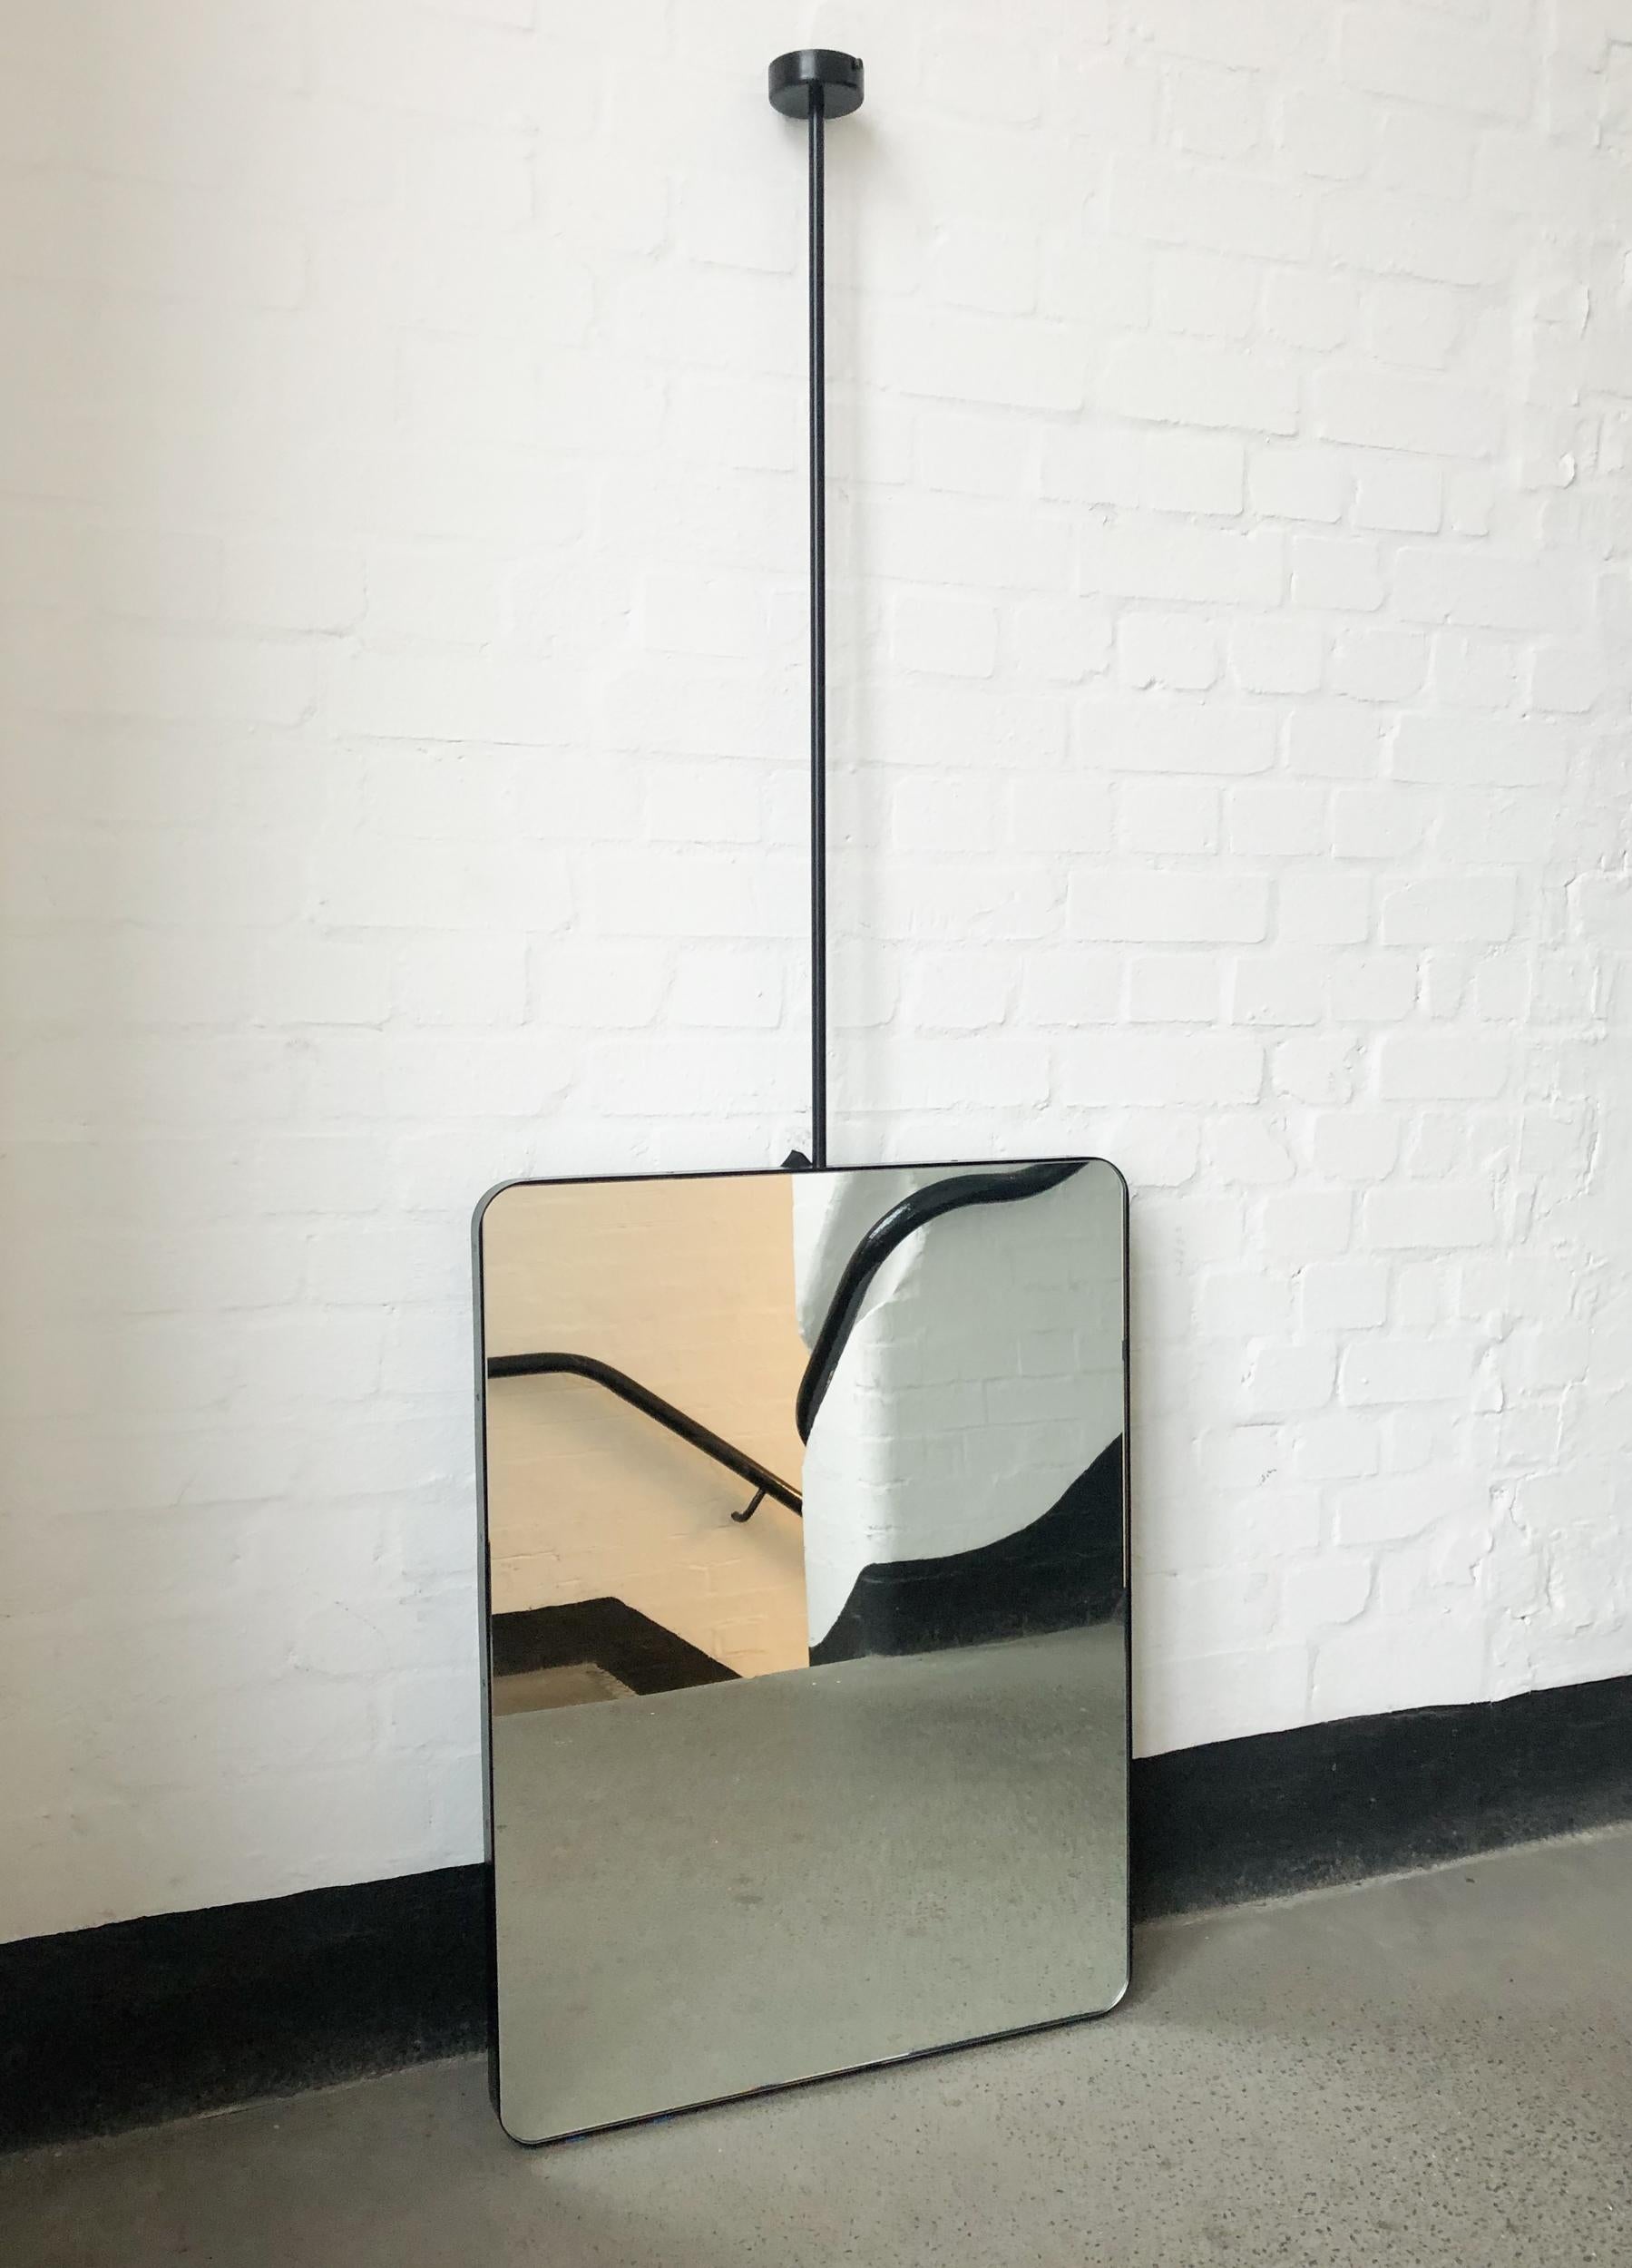 The images in this bespoke listing do not represent the approved modifications, and they refer to a standard size of the suspended Quadris™ mirror with a matte black frame. All specifications for this particular listing are as detailed in the